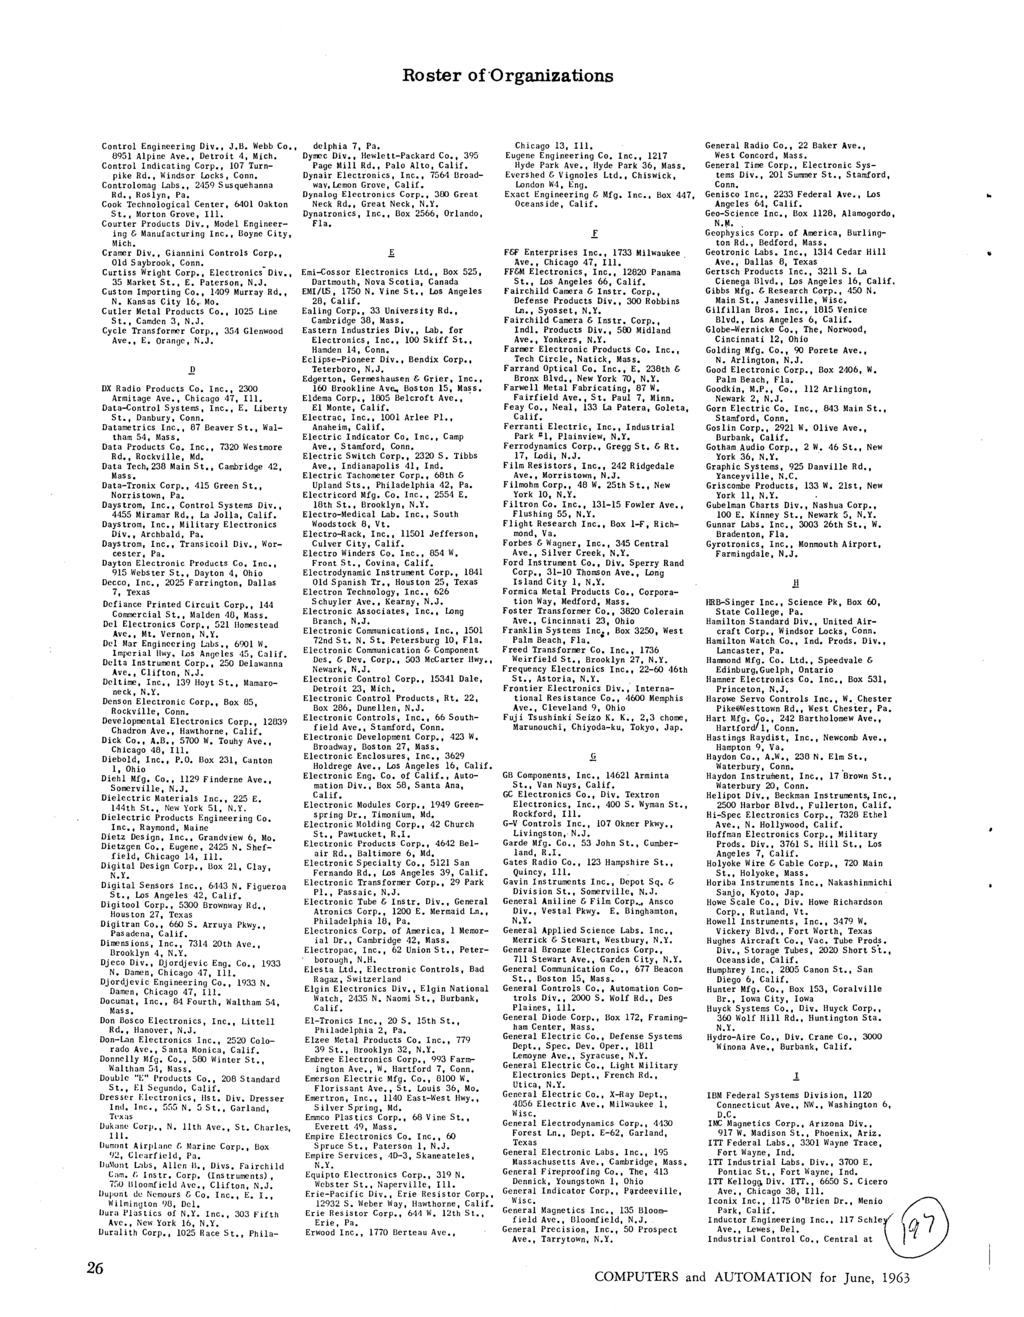 Roster of'organizations Control Engineering, J.ll. Webb Co., delphia 7, Pa. 8951 Alpine Ave., Detroit 4, Mich. Dyrrec, Hewlett-Packard Co., 395 Control Indicating, 107 Turn- Page Mill Rd.